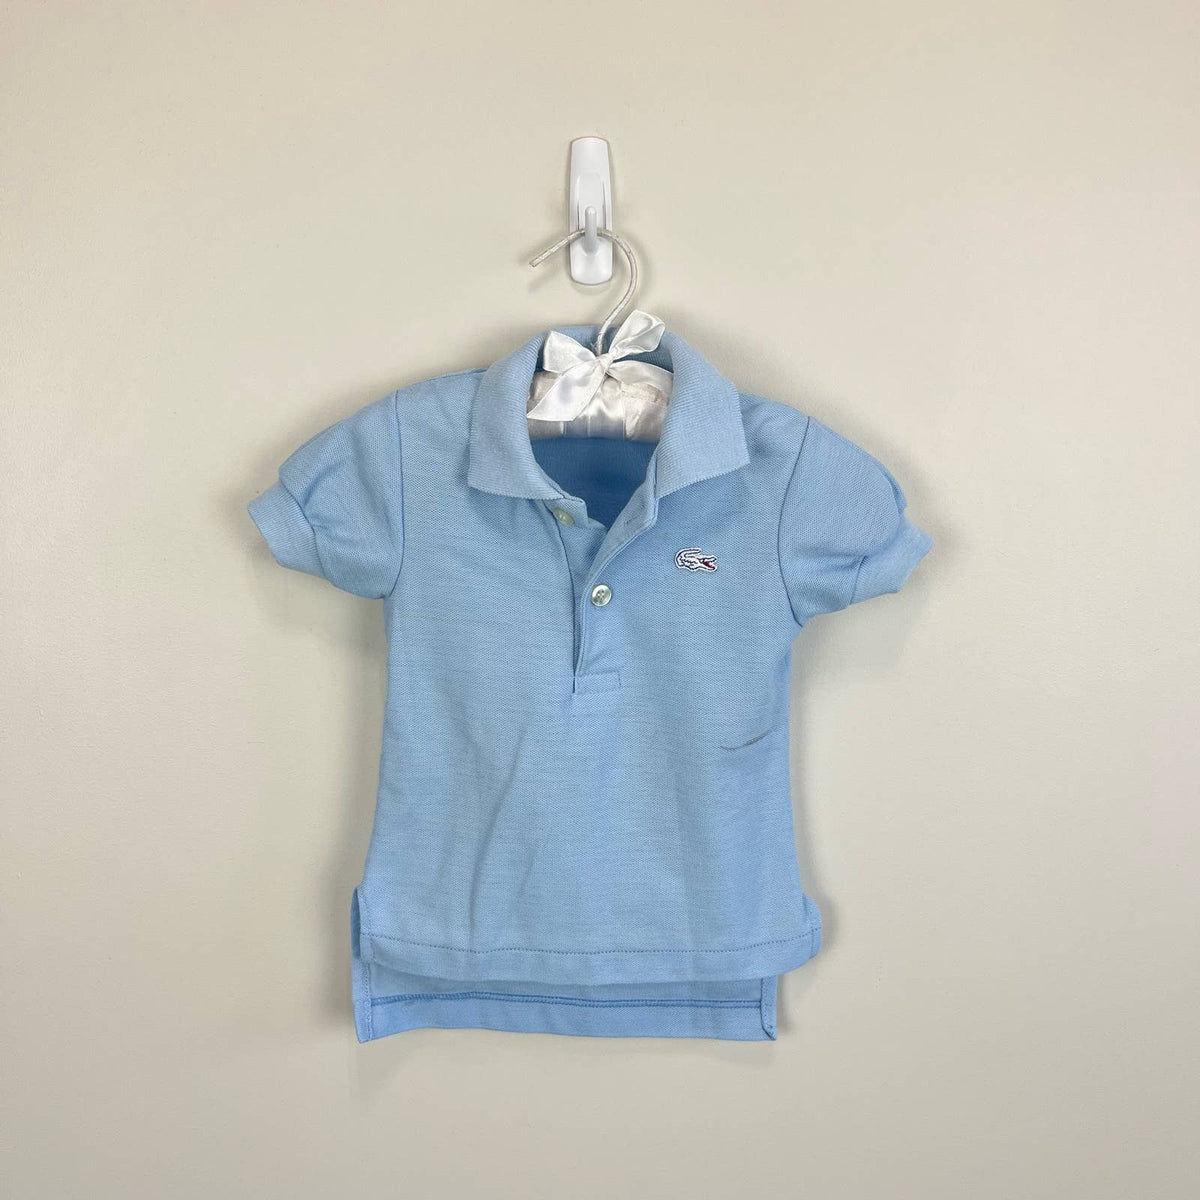 Vintage Izod Lacoste Baby Blue Polo Shirt andescloset91